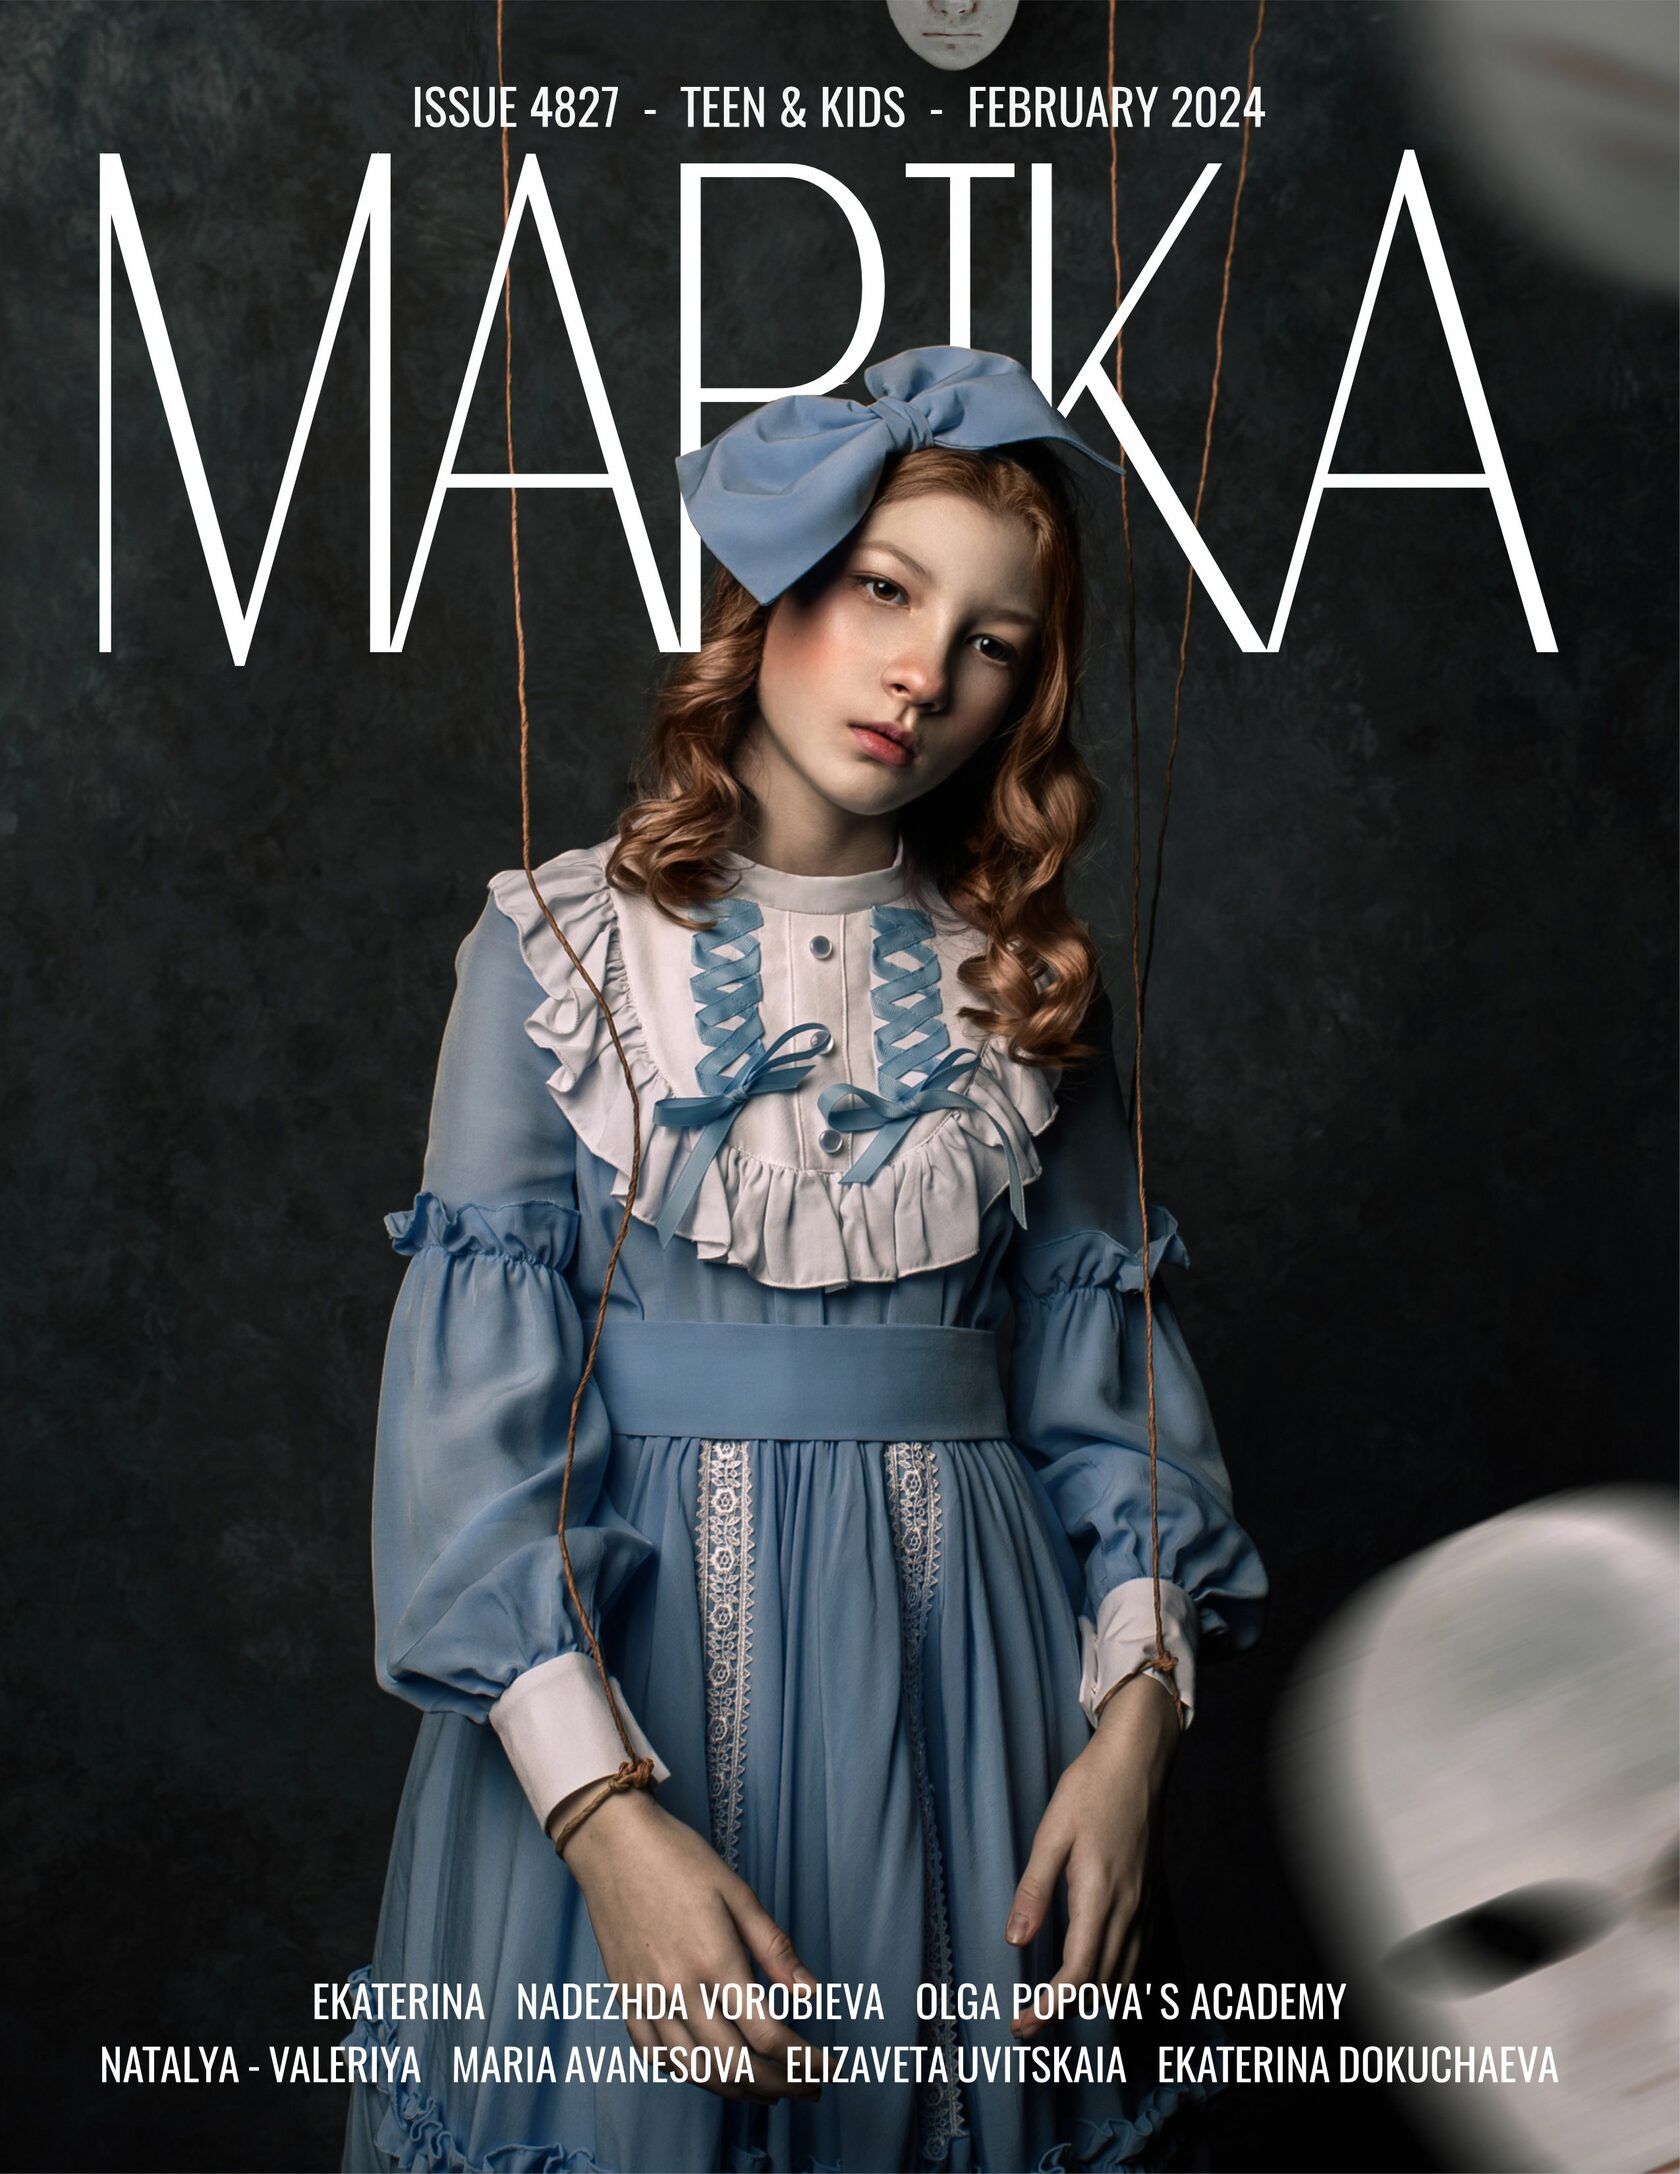 Marika Magazine - What age did you fall in love the first time? ❤️ Female  Model: Isabella Cundy @bellacundy Model: India Varma @indieinwonderland  Female Model: Katherine Fox @katherine_fox_official Model: Naia Lynne  @naialynne